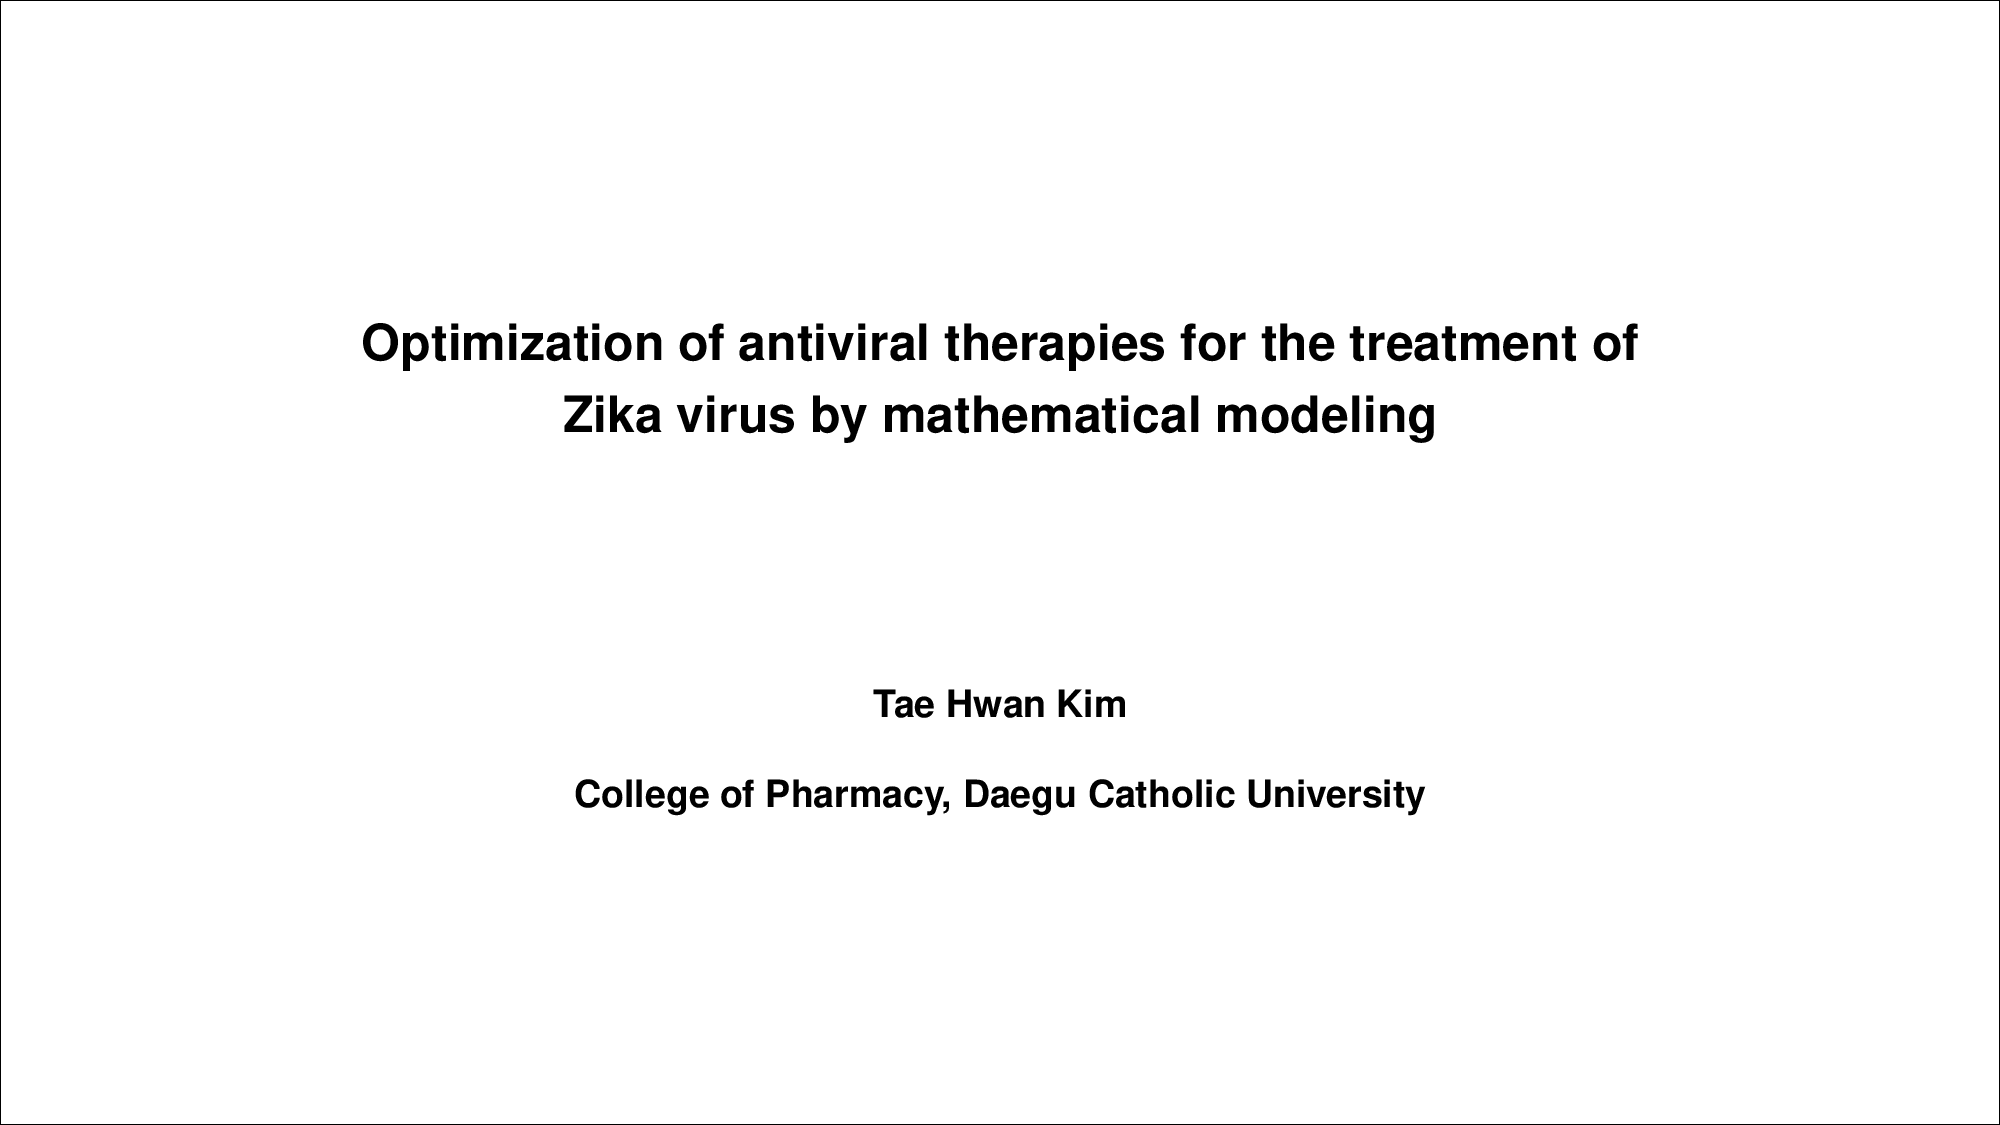 Optimazation of antiviral therapies for the treatment of Zika virus by mathematical modeling